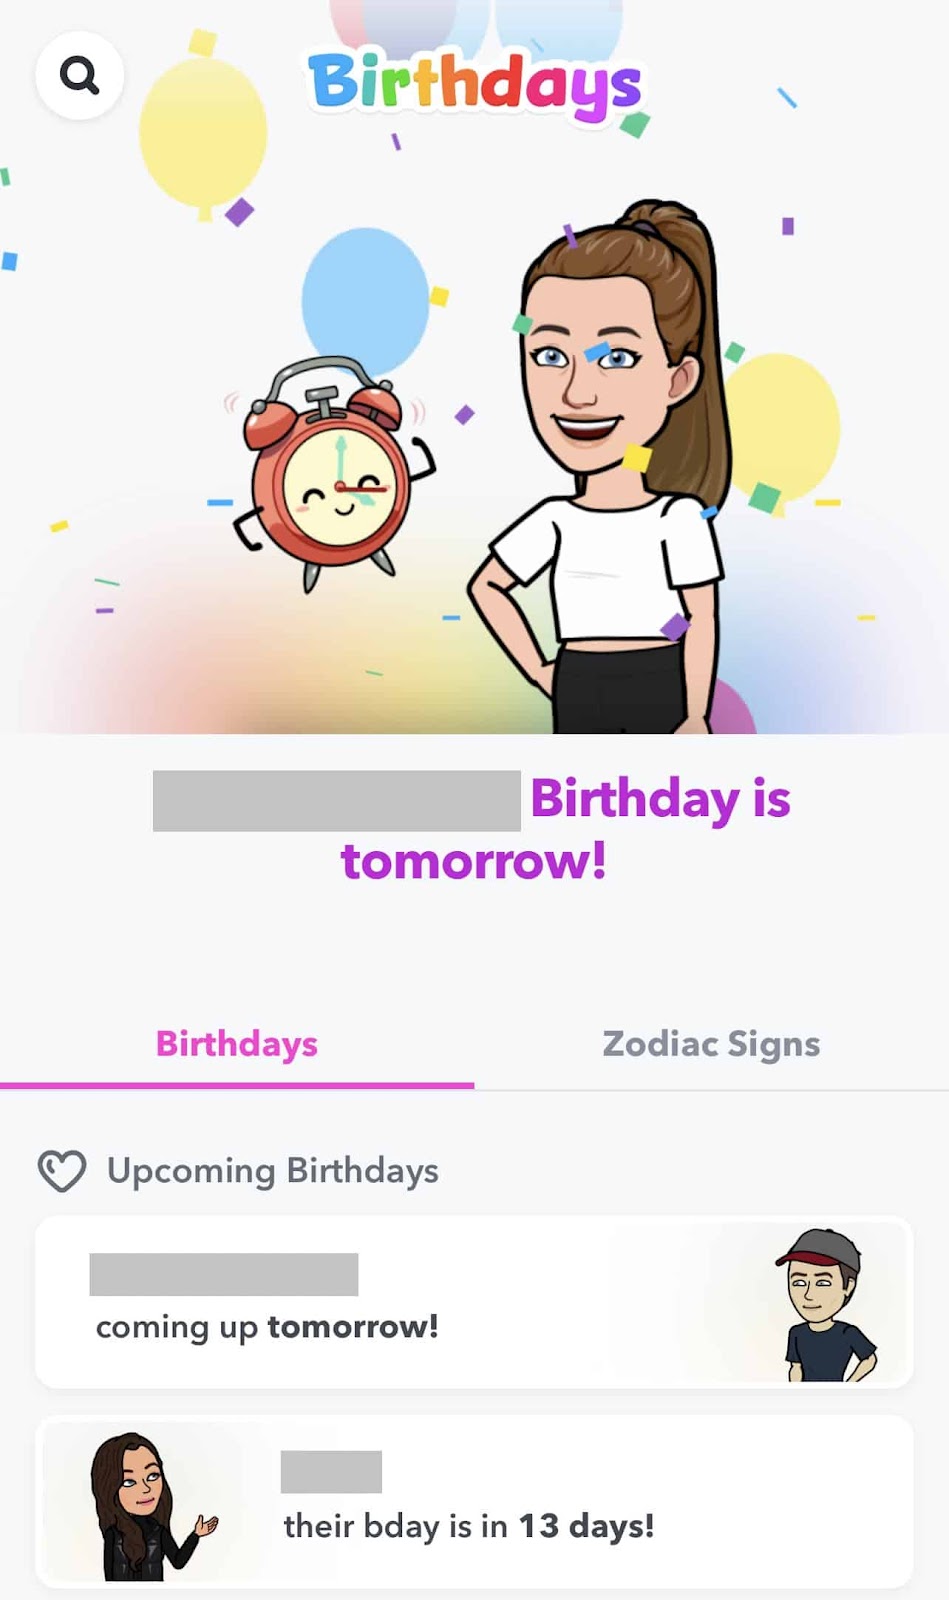 How to view upcoming birthdays on snapchat using Android devices.